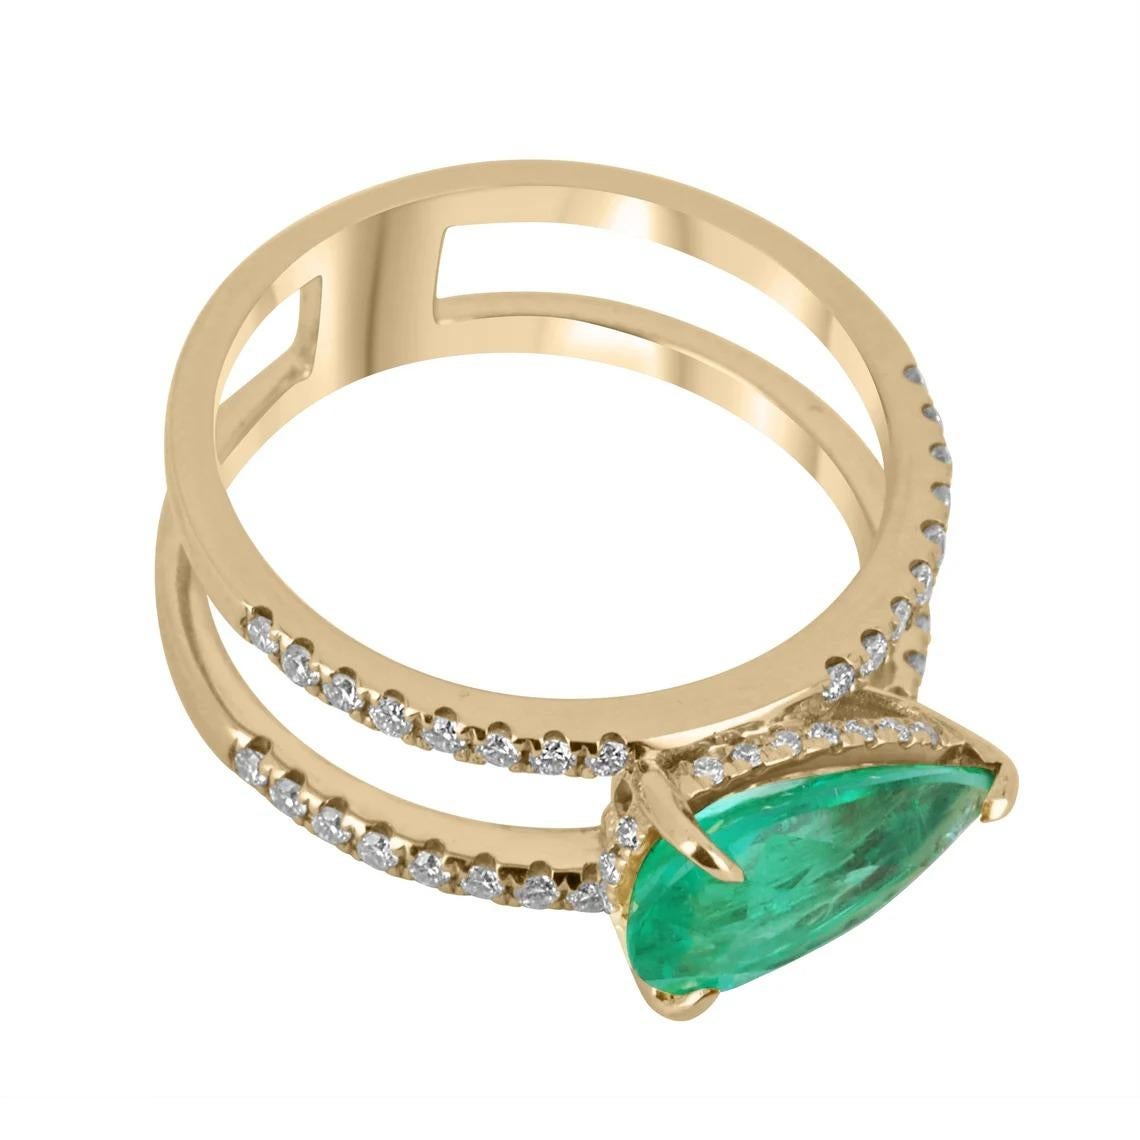 An absolutely stunning, Colombian emerald and diamond ring. The center stone features a lovely 2.03-carat, pear-cut Colombian emerald as it lays east to west, set in a 3-prong setting. The diamond shank is split, parallel to one another with pave